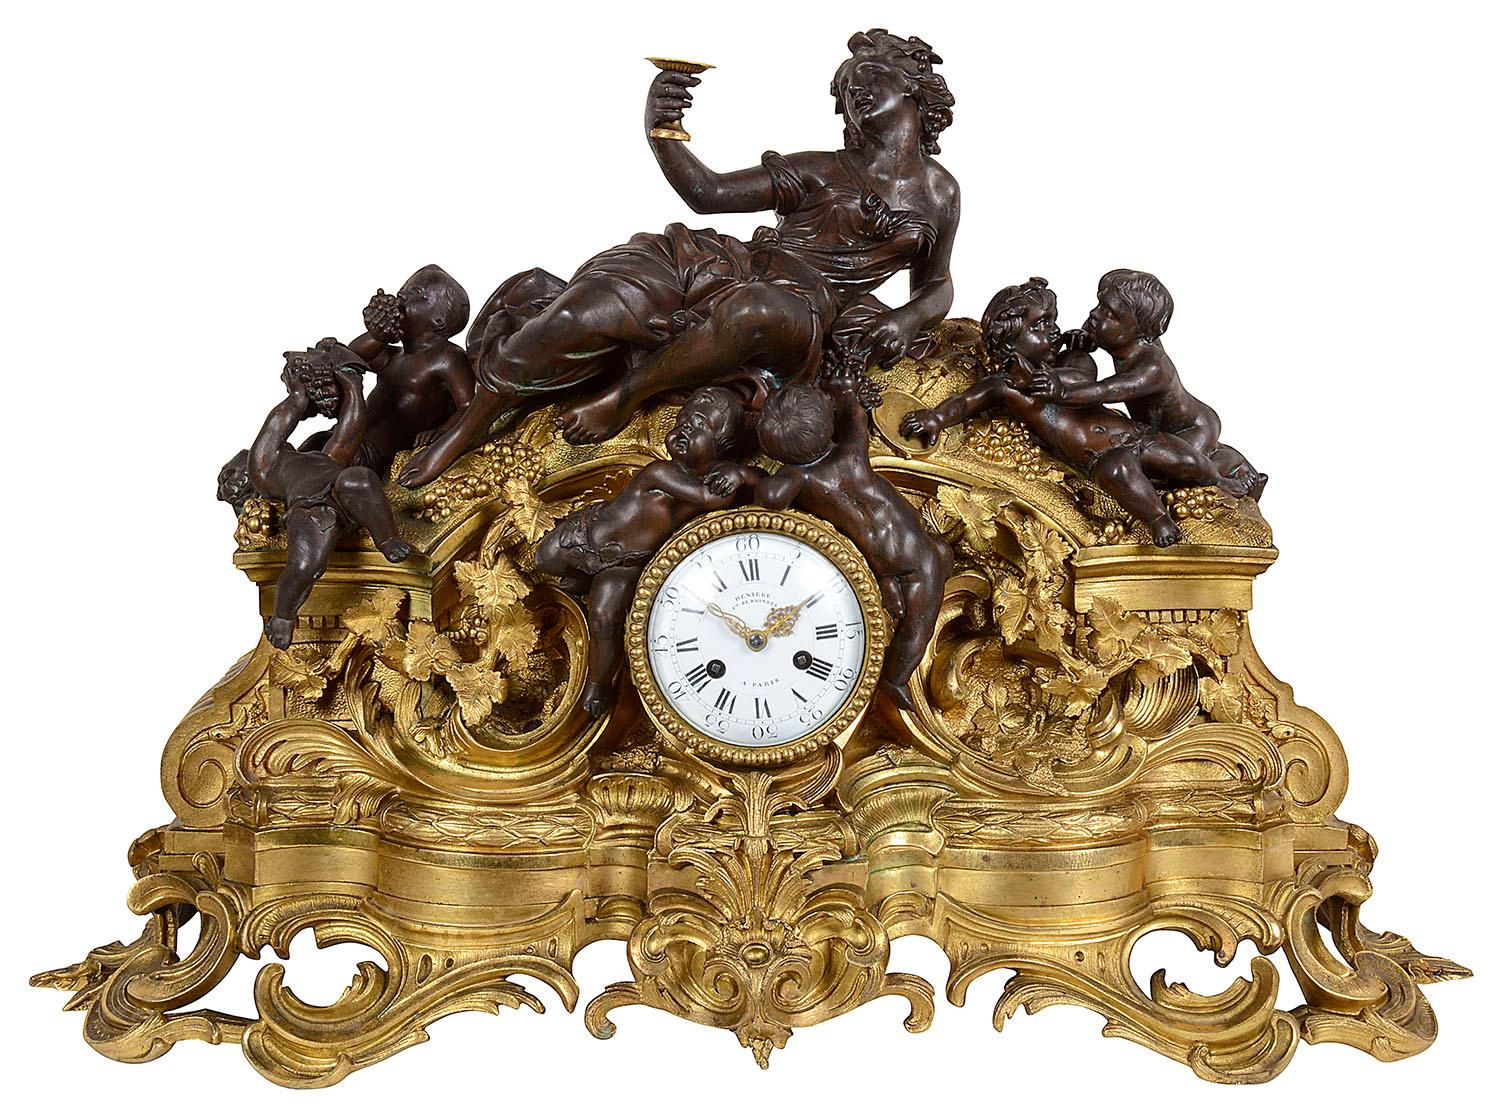 A very impressive 19th century Louis XVI style Bachuss influenced bronze and gilded ormolu clock garniture. The pair of four branch candelabra each supported by bronze putti, raised on gilded ormolu tripod bases with shell and rams head mount.
The